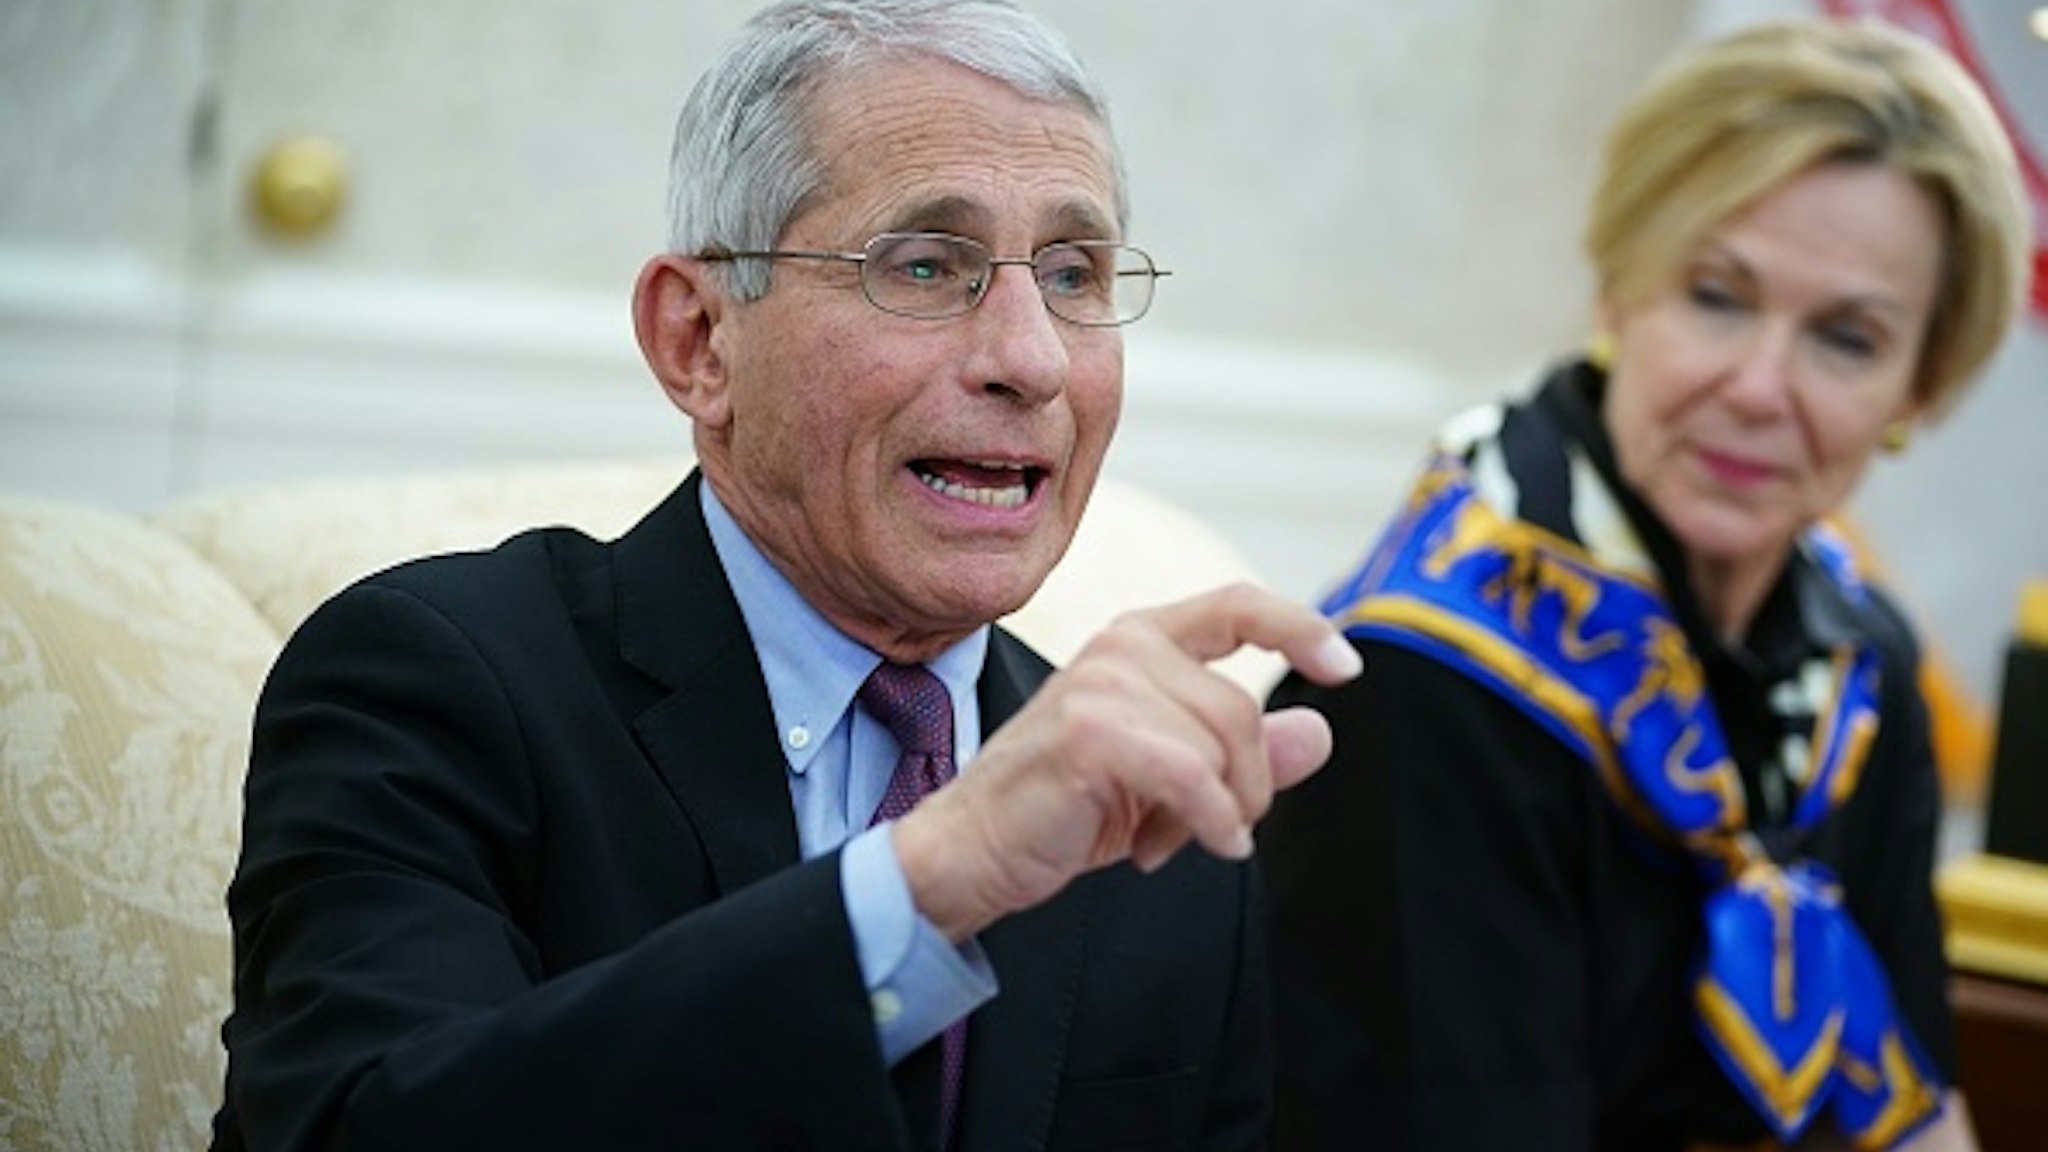 Dr. Anthony Fauci (L), director of the National Institute of Allergy and Infectious Diseases speaks next to Response coordinator for White House Coronavirus Task Force Deborah Birx, during a meeting with US President Donald Trump and Louisiana Governor John Bel Edwards D-LA in the Oval Office of the White House in Washington, DC on April 29, 2020